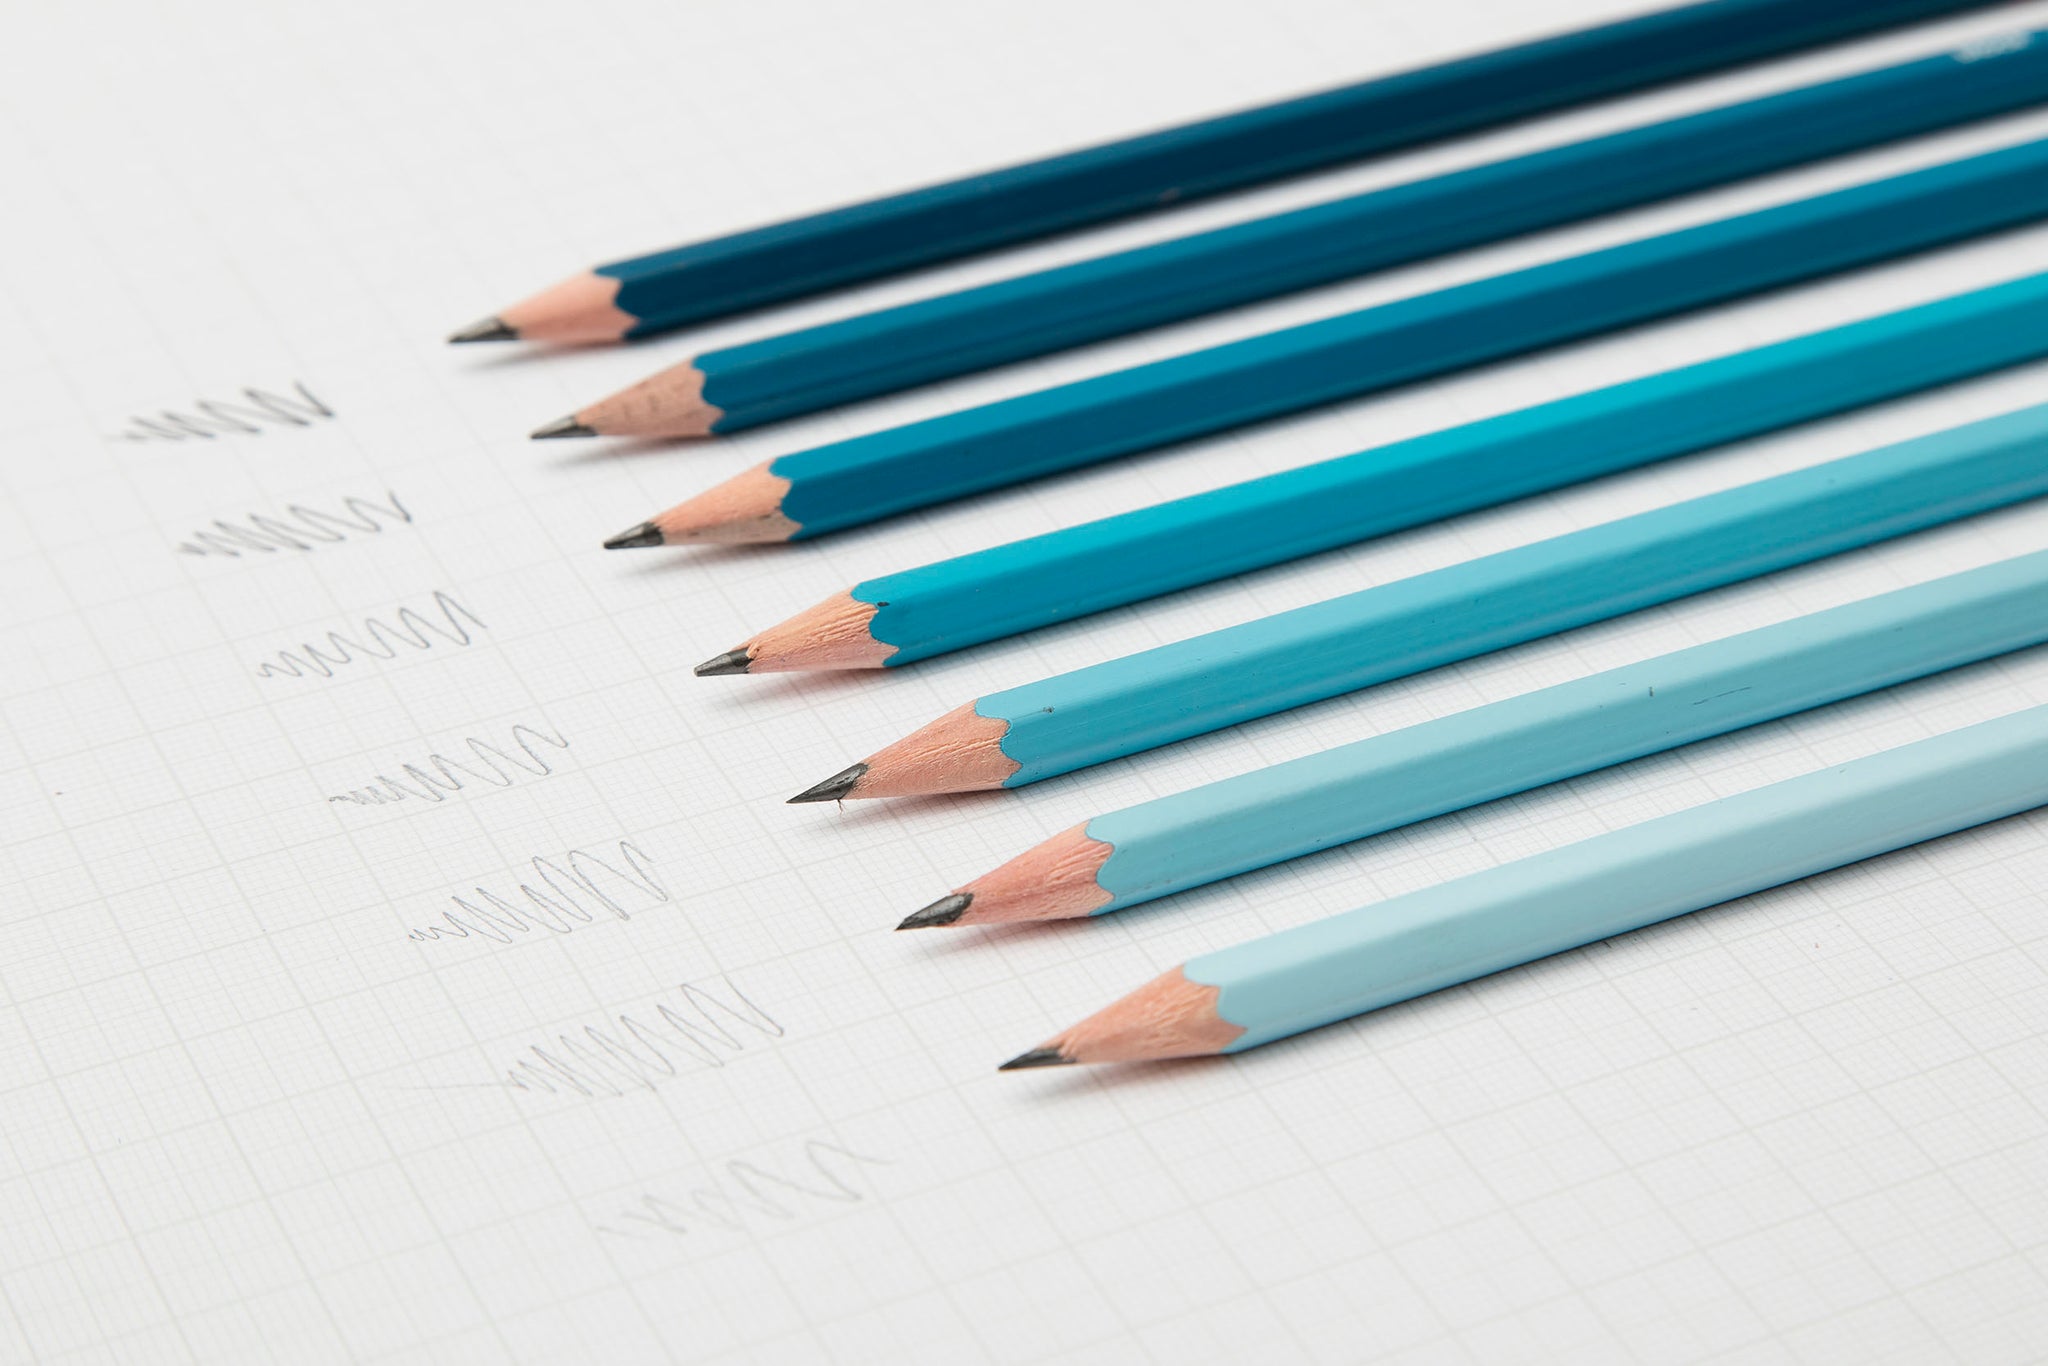 Chambers - The Home of British Made Pencils